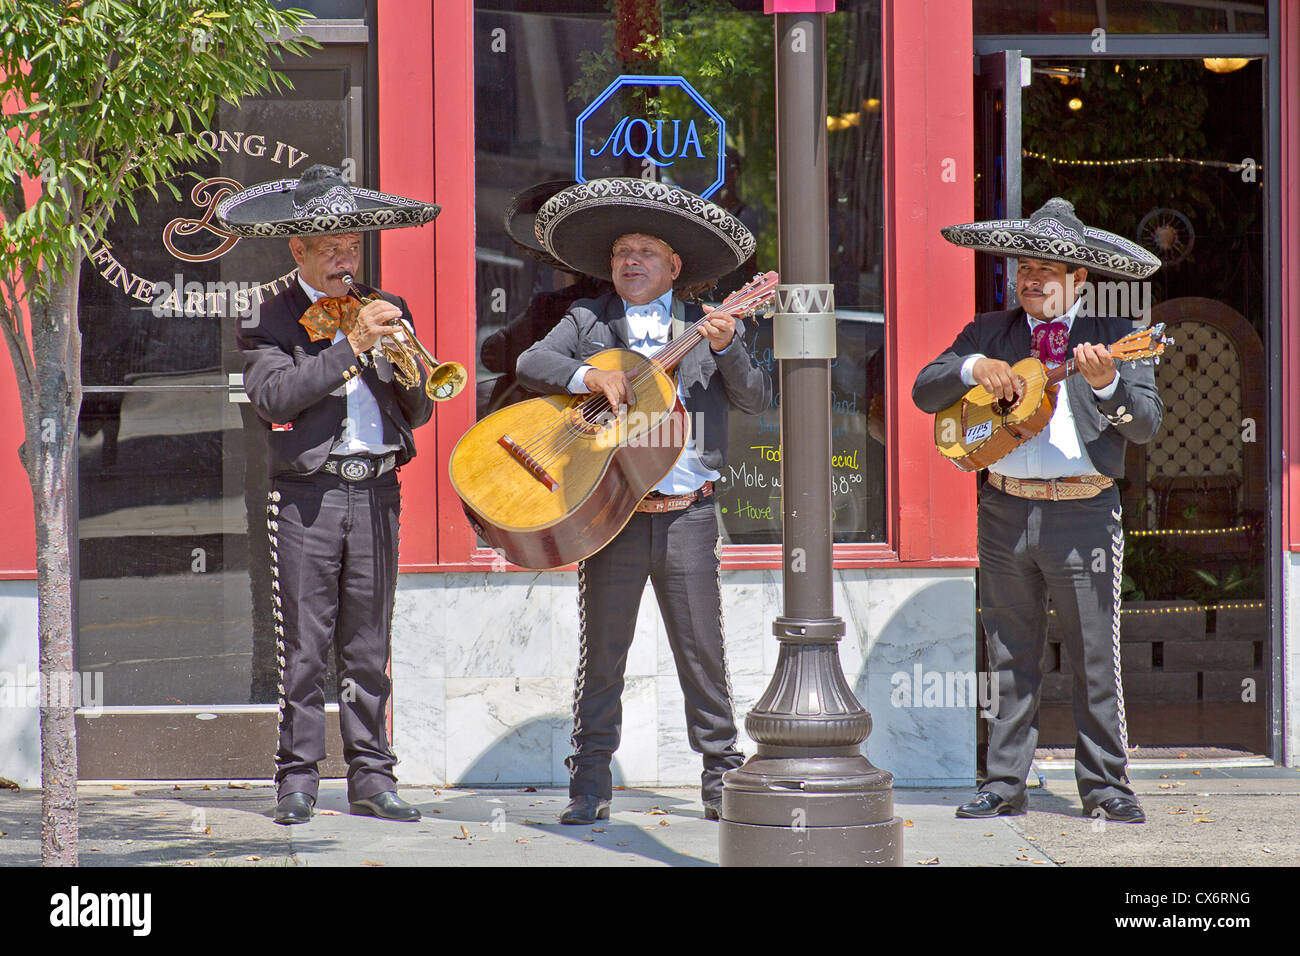 A three piece mariachi band plays for tips in front of a restaurant in downtown Asheville, North Carolina on August 26, 2012 Stock Photo